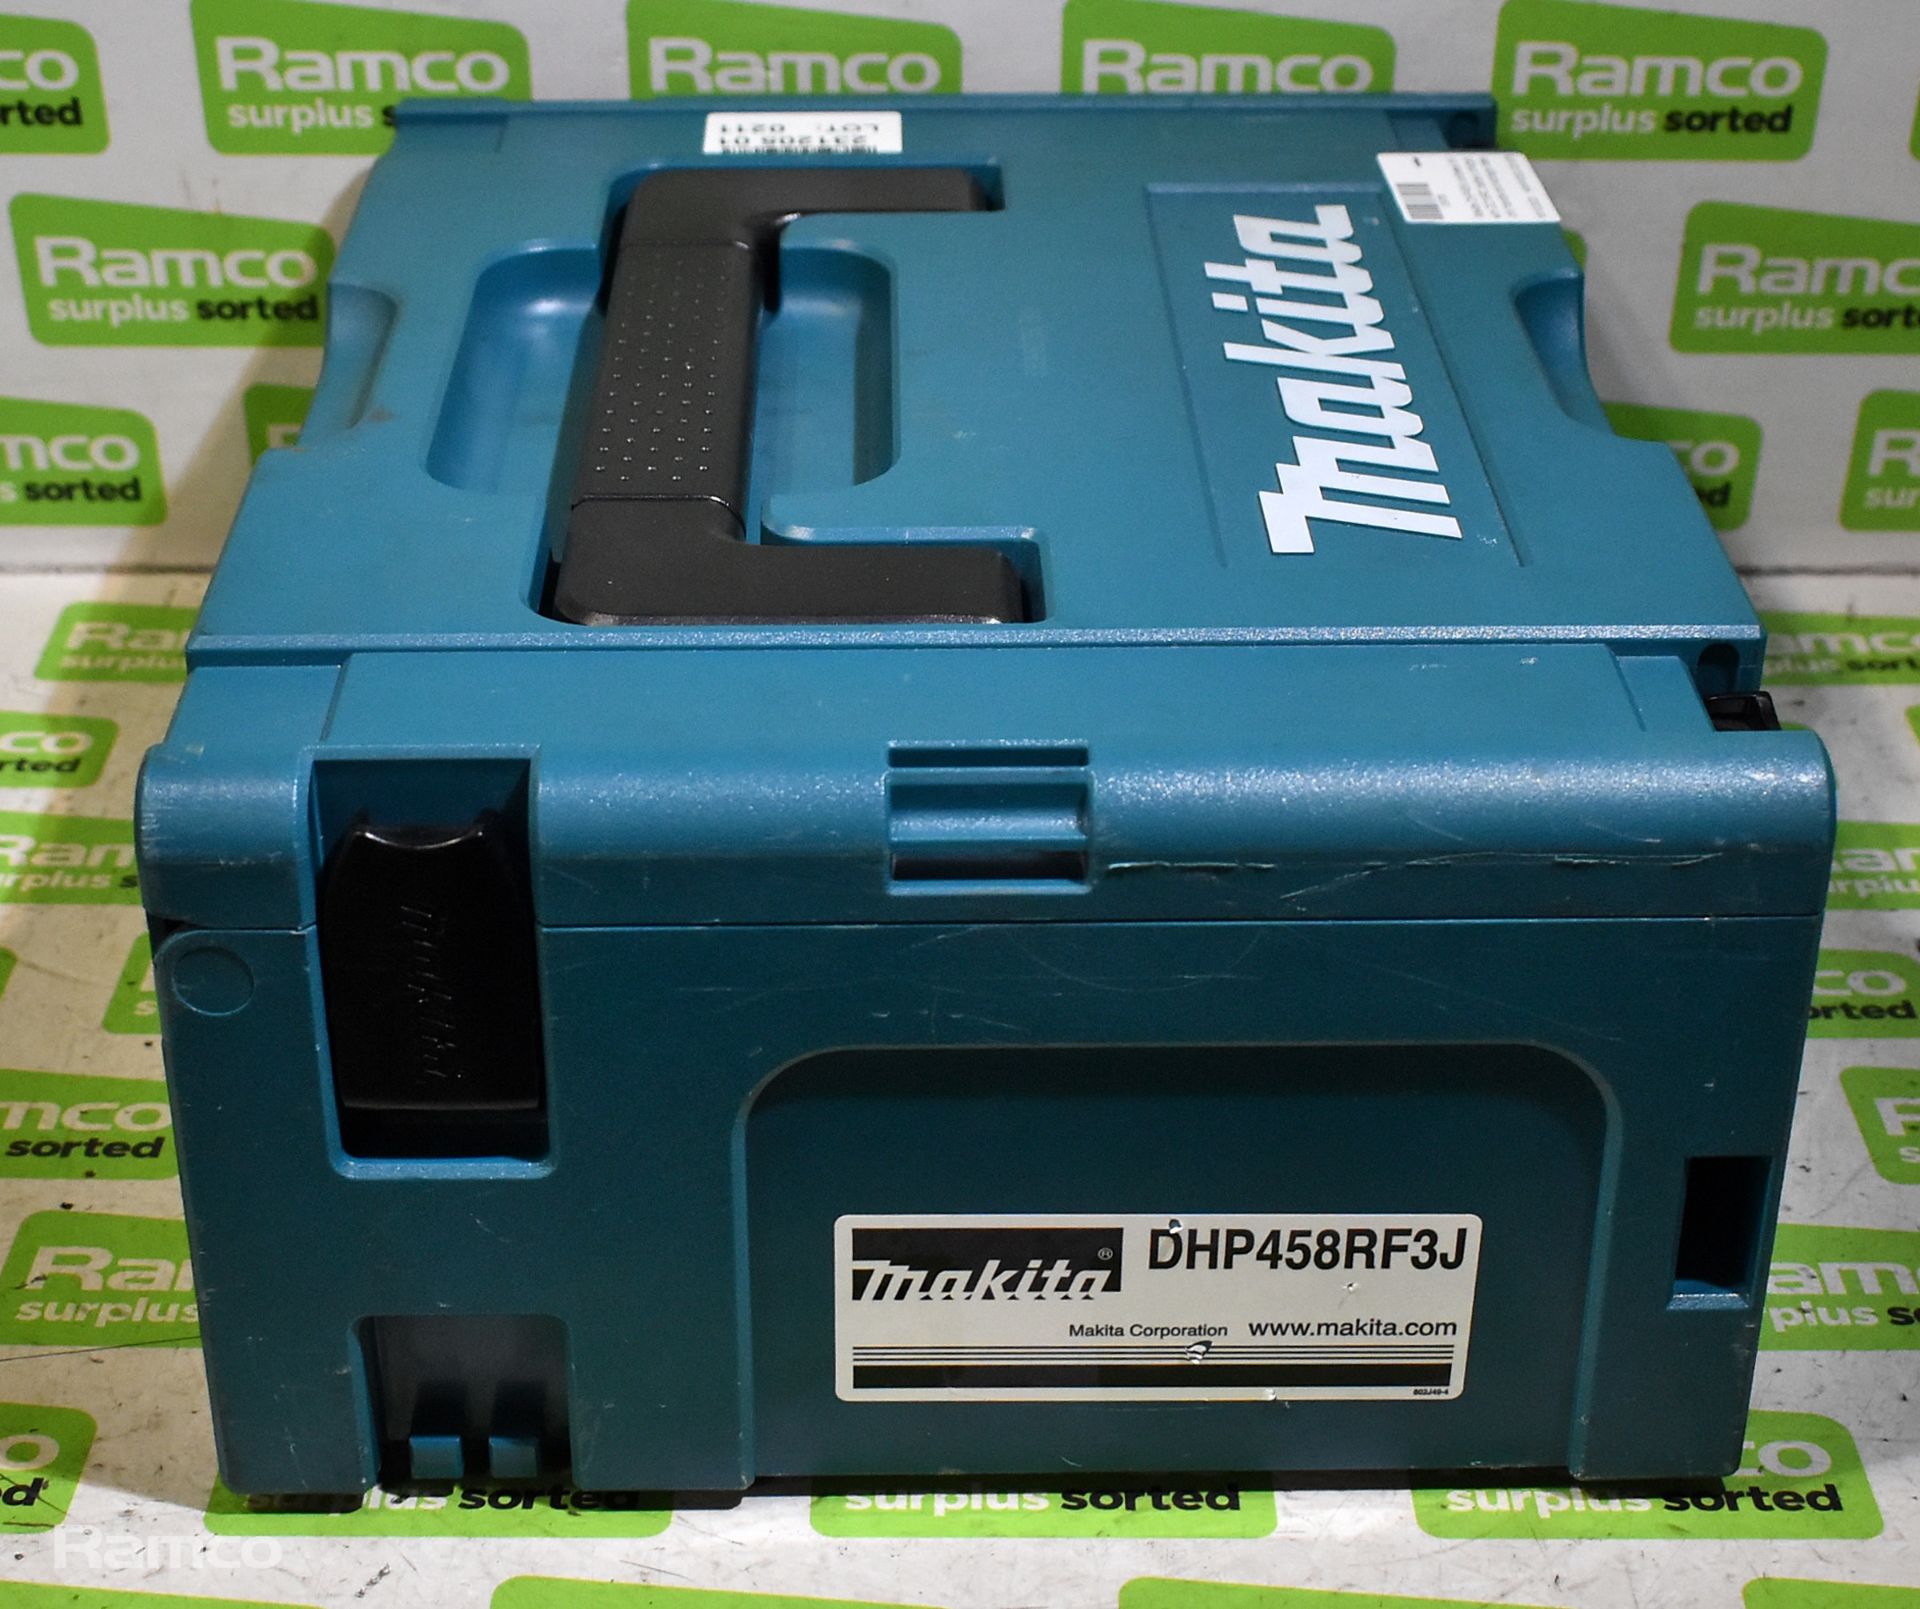 Makita DHP458 cordless drill with DC18RC battery charger, drill handle and storage case - Image 6 of 6